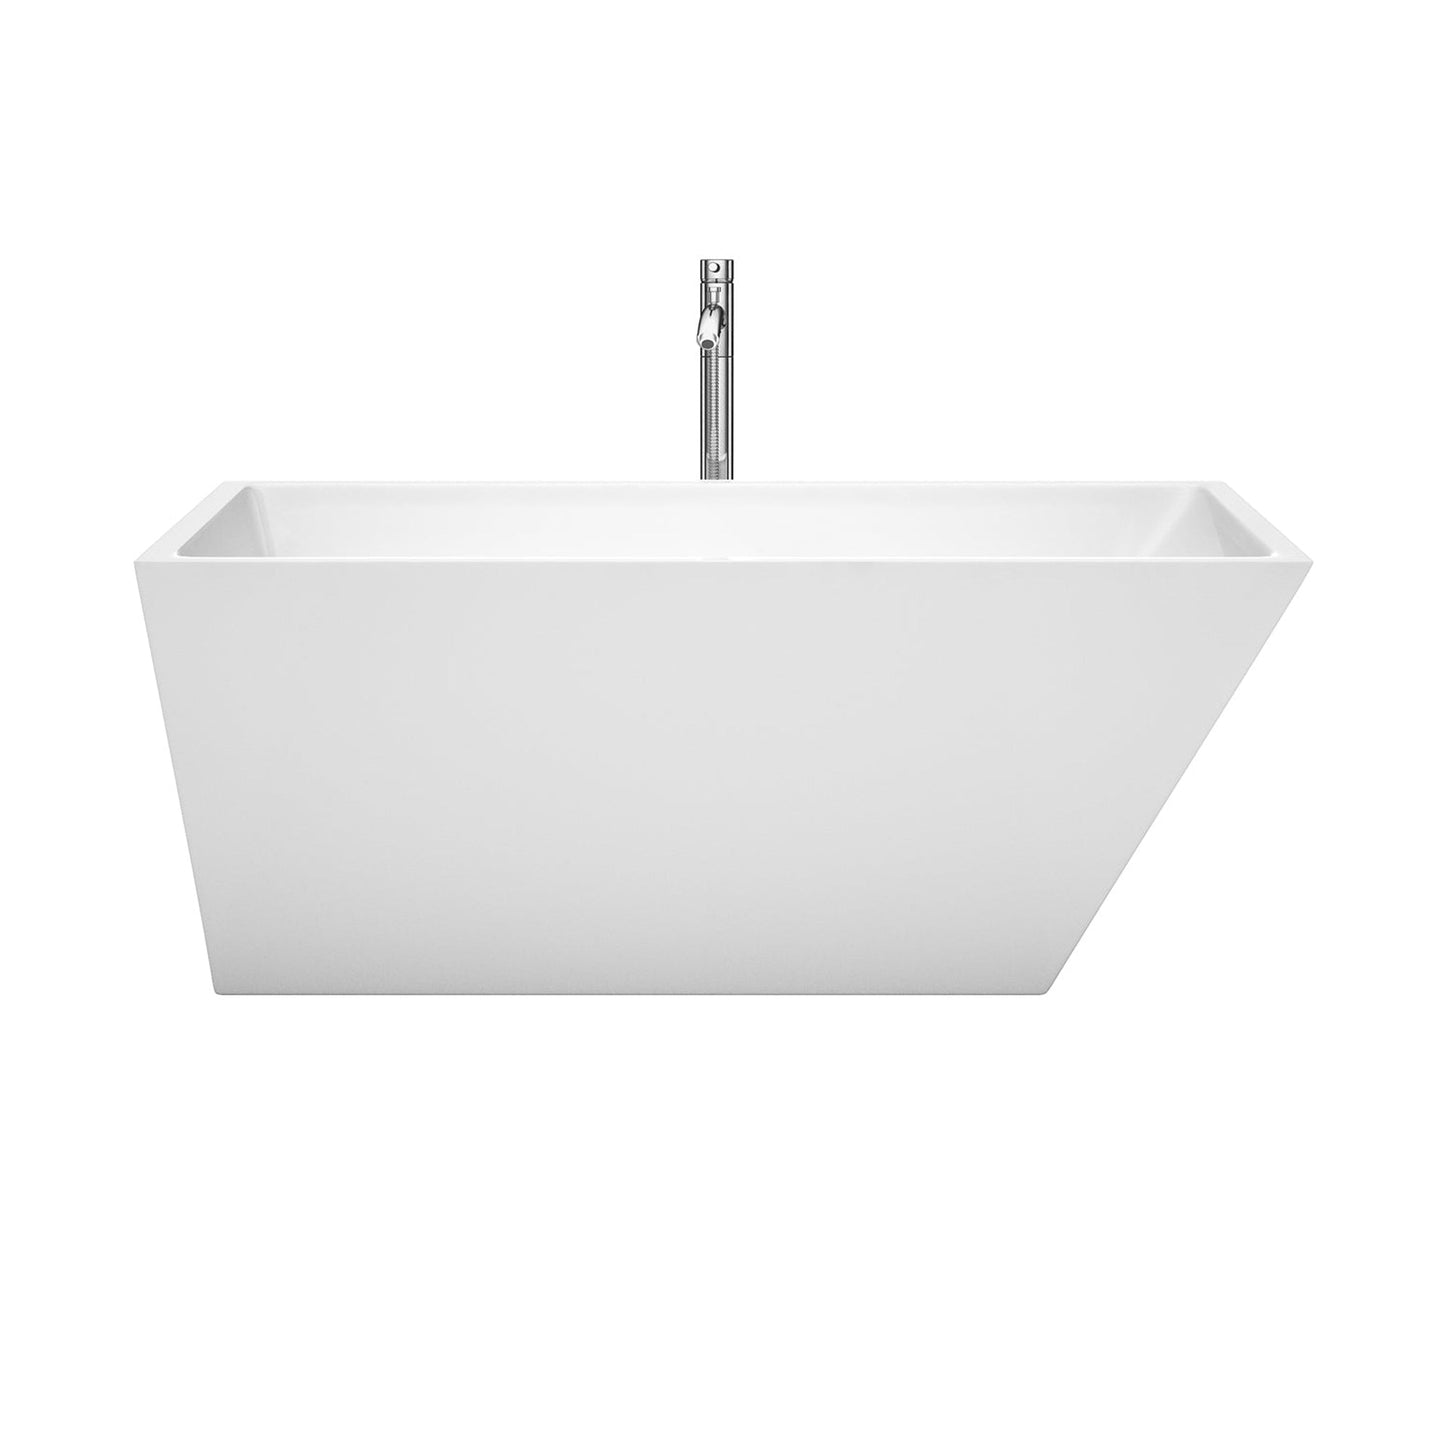 Wyndham Collection Hannah 59" Freestanding Bathtub in White With Floor Mounted Faucet, Drain and Overflow Trim in Polished Chrome